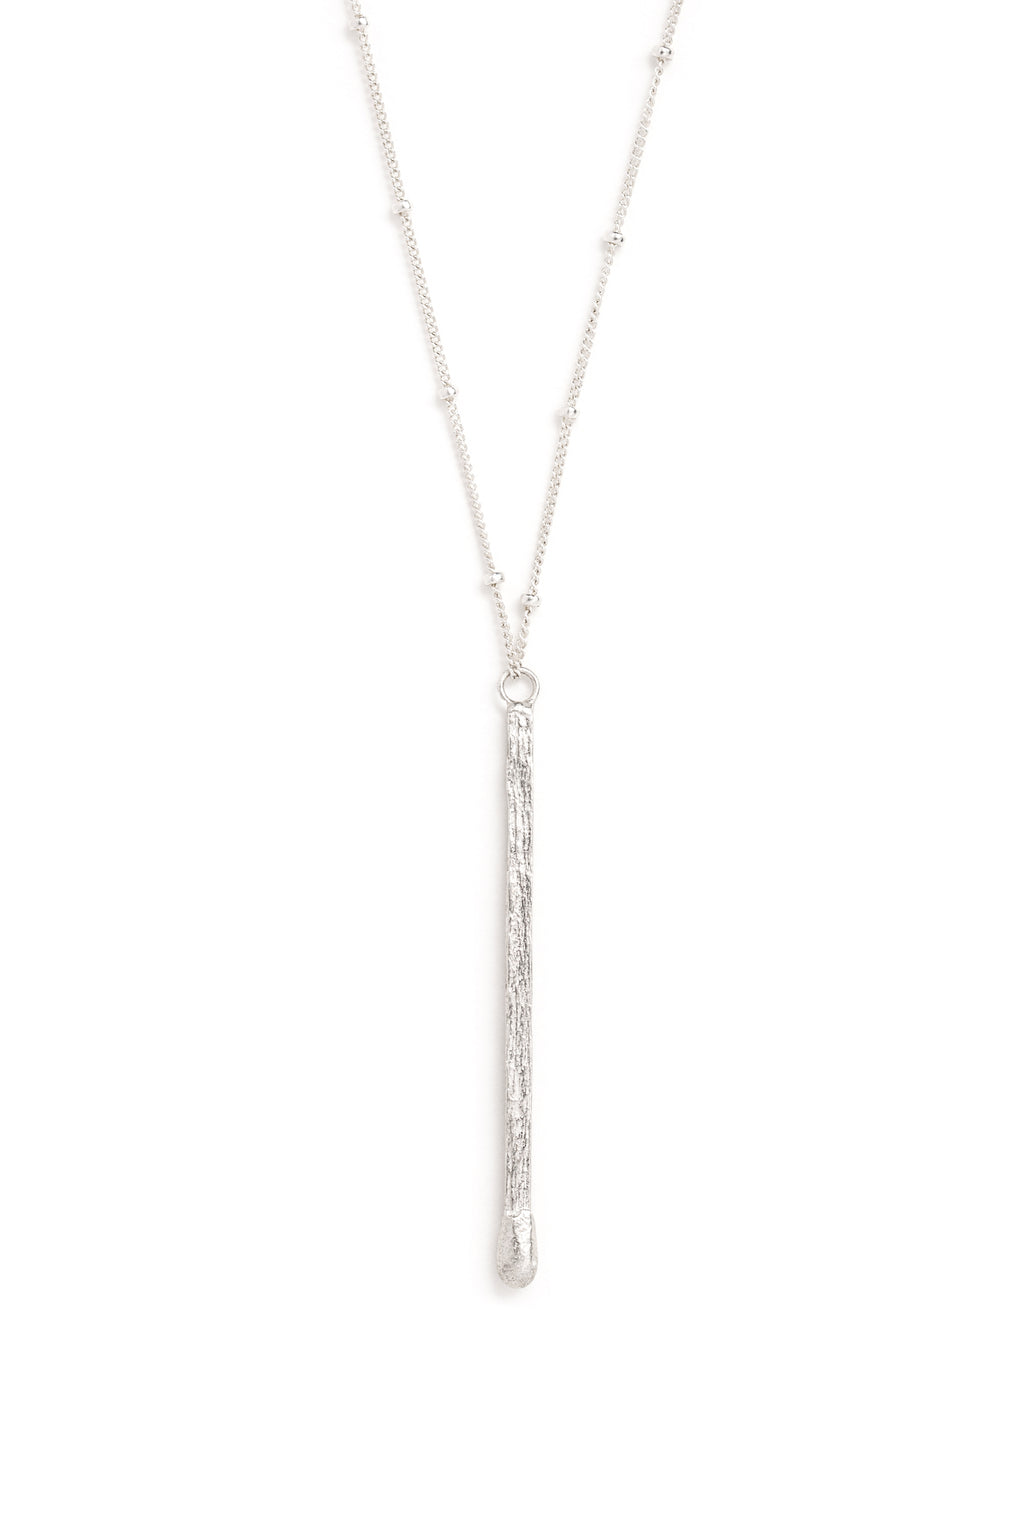 CAT LUCK “Ignite” Necklace // Sterling Silver